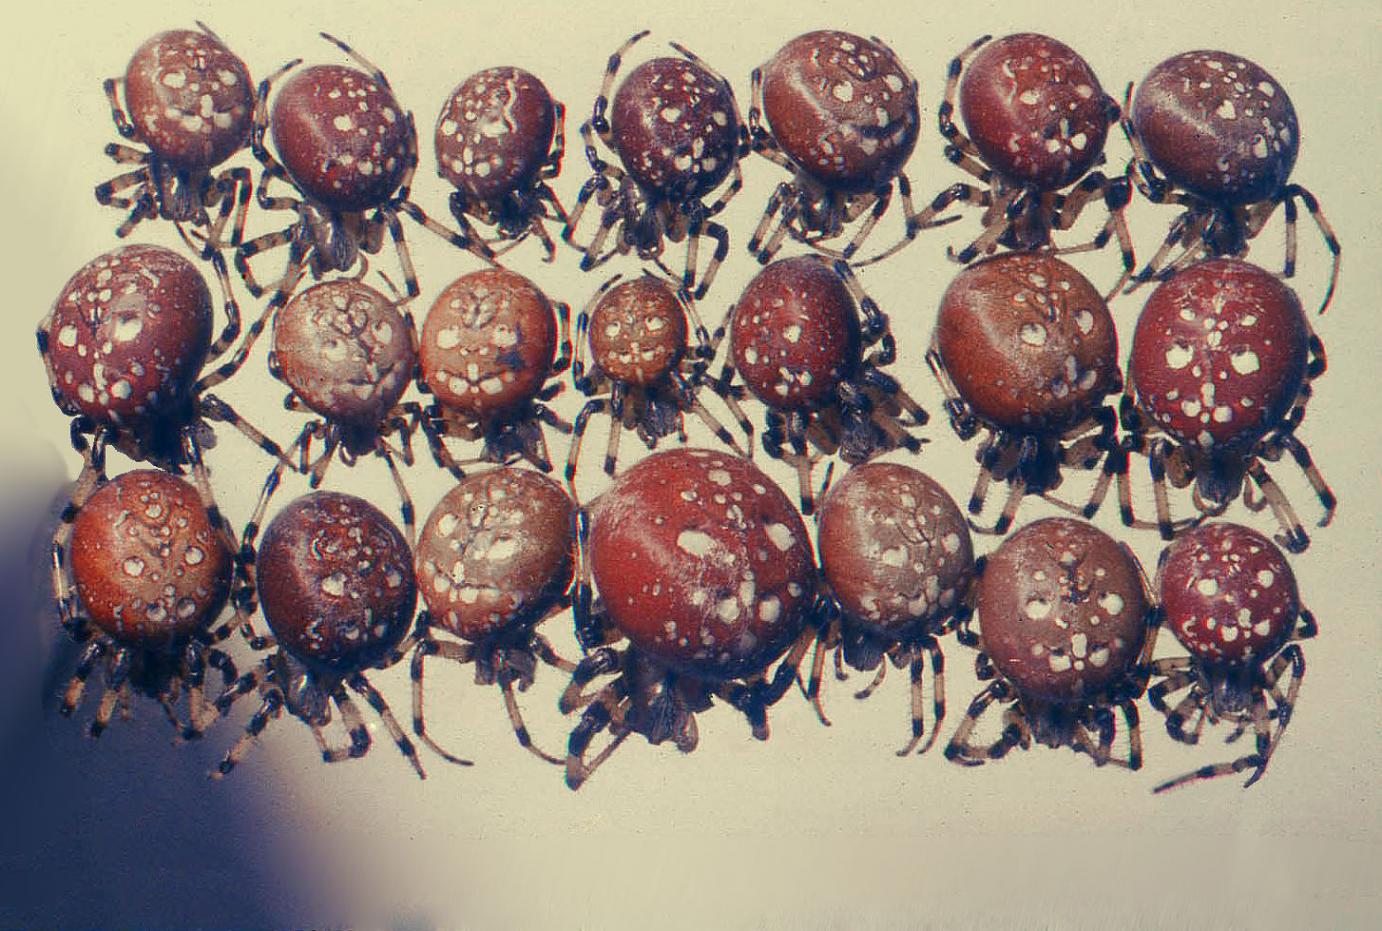 21 spiders in rows showing their color variation